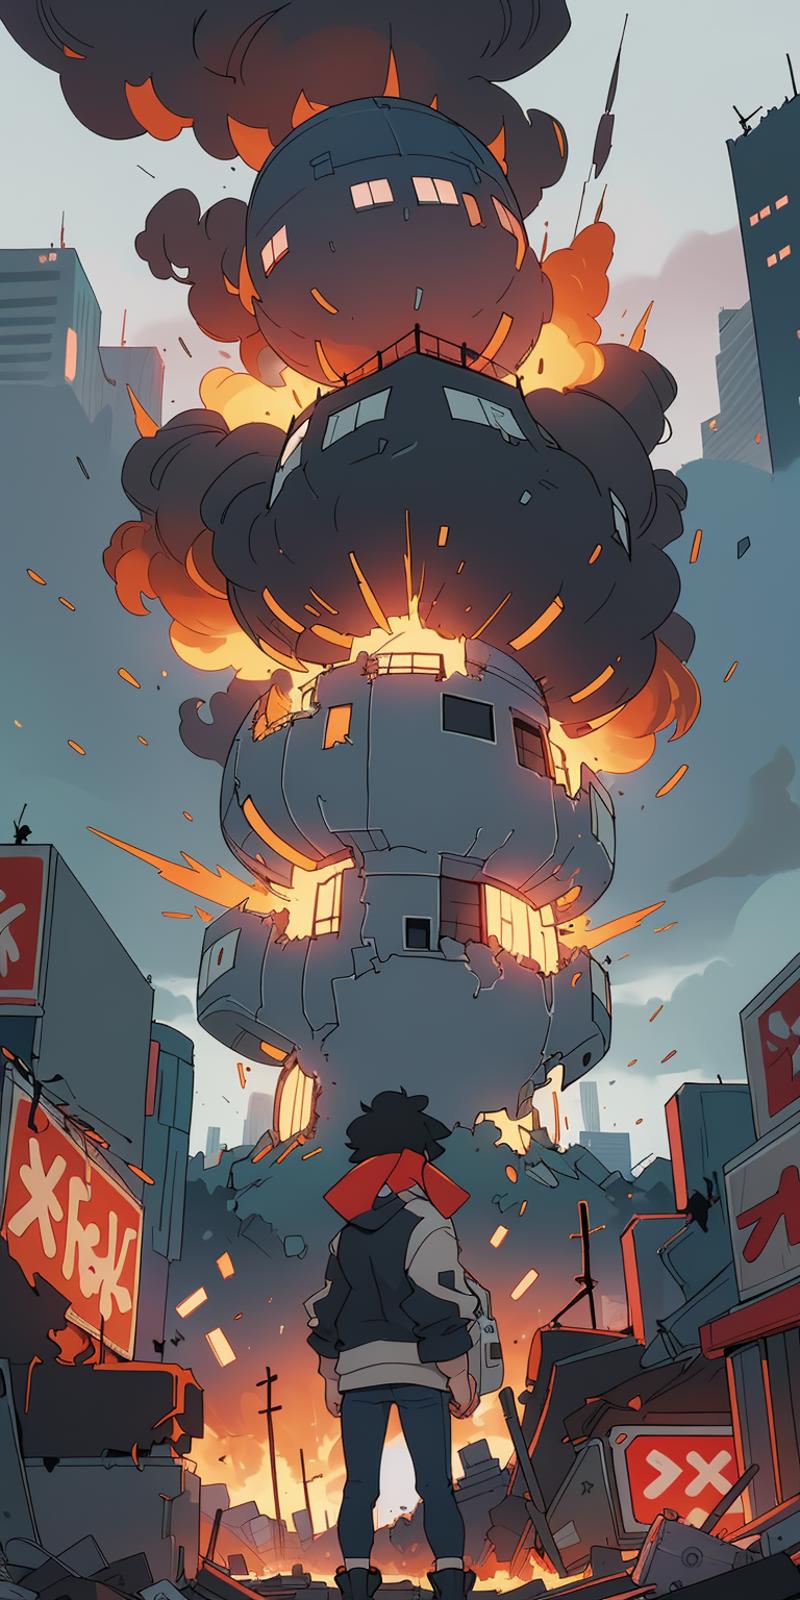 A large explosion is happening in the middle of a city, and a person is watching in the foreground.